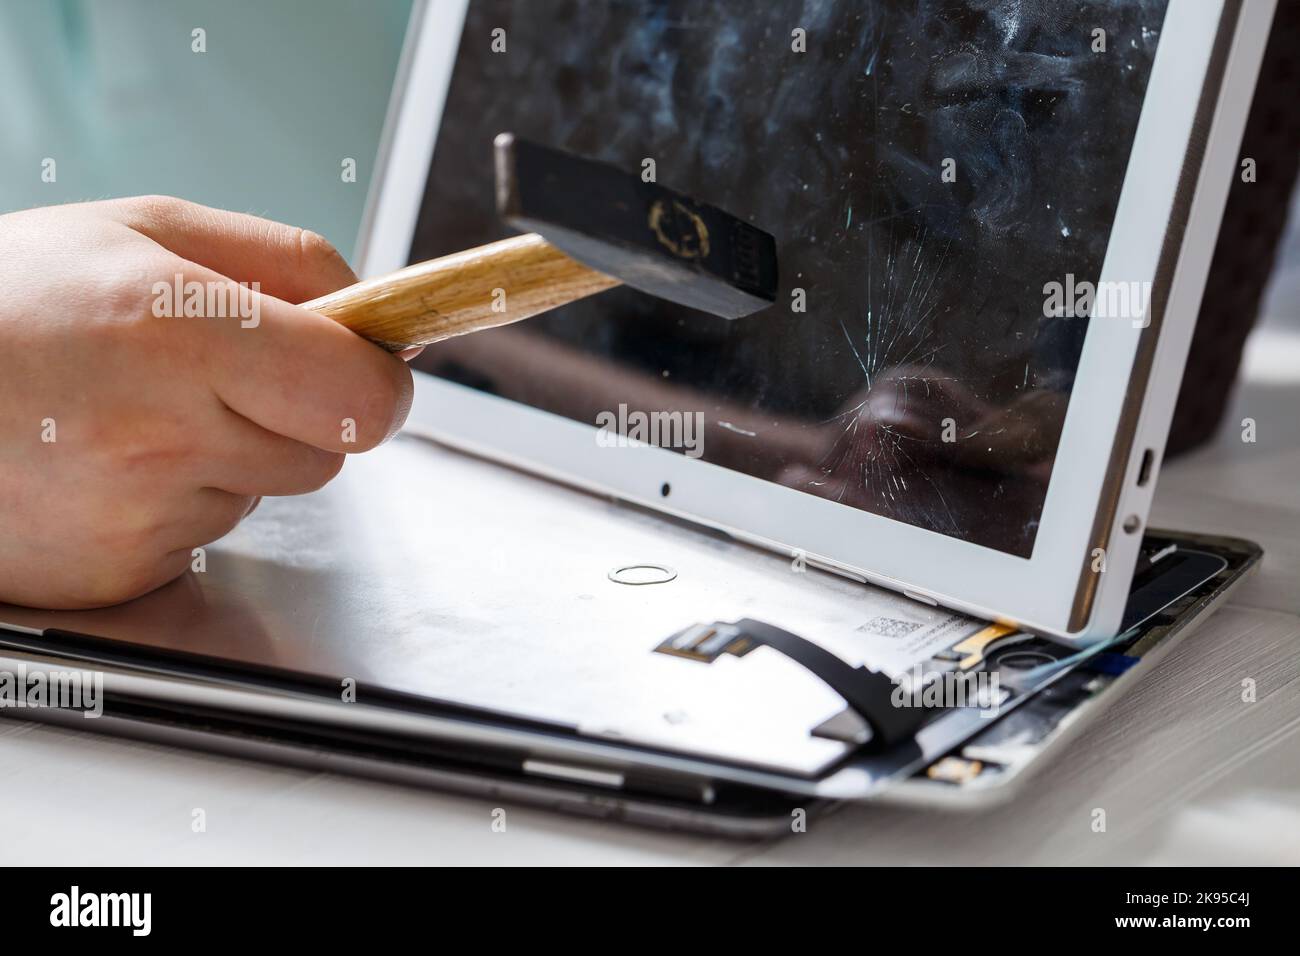 The hammer hits the broken touchscreen tablet, suggesting that it is about to replace it. Broken glass tablet repair Stock Photo